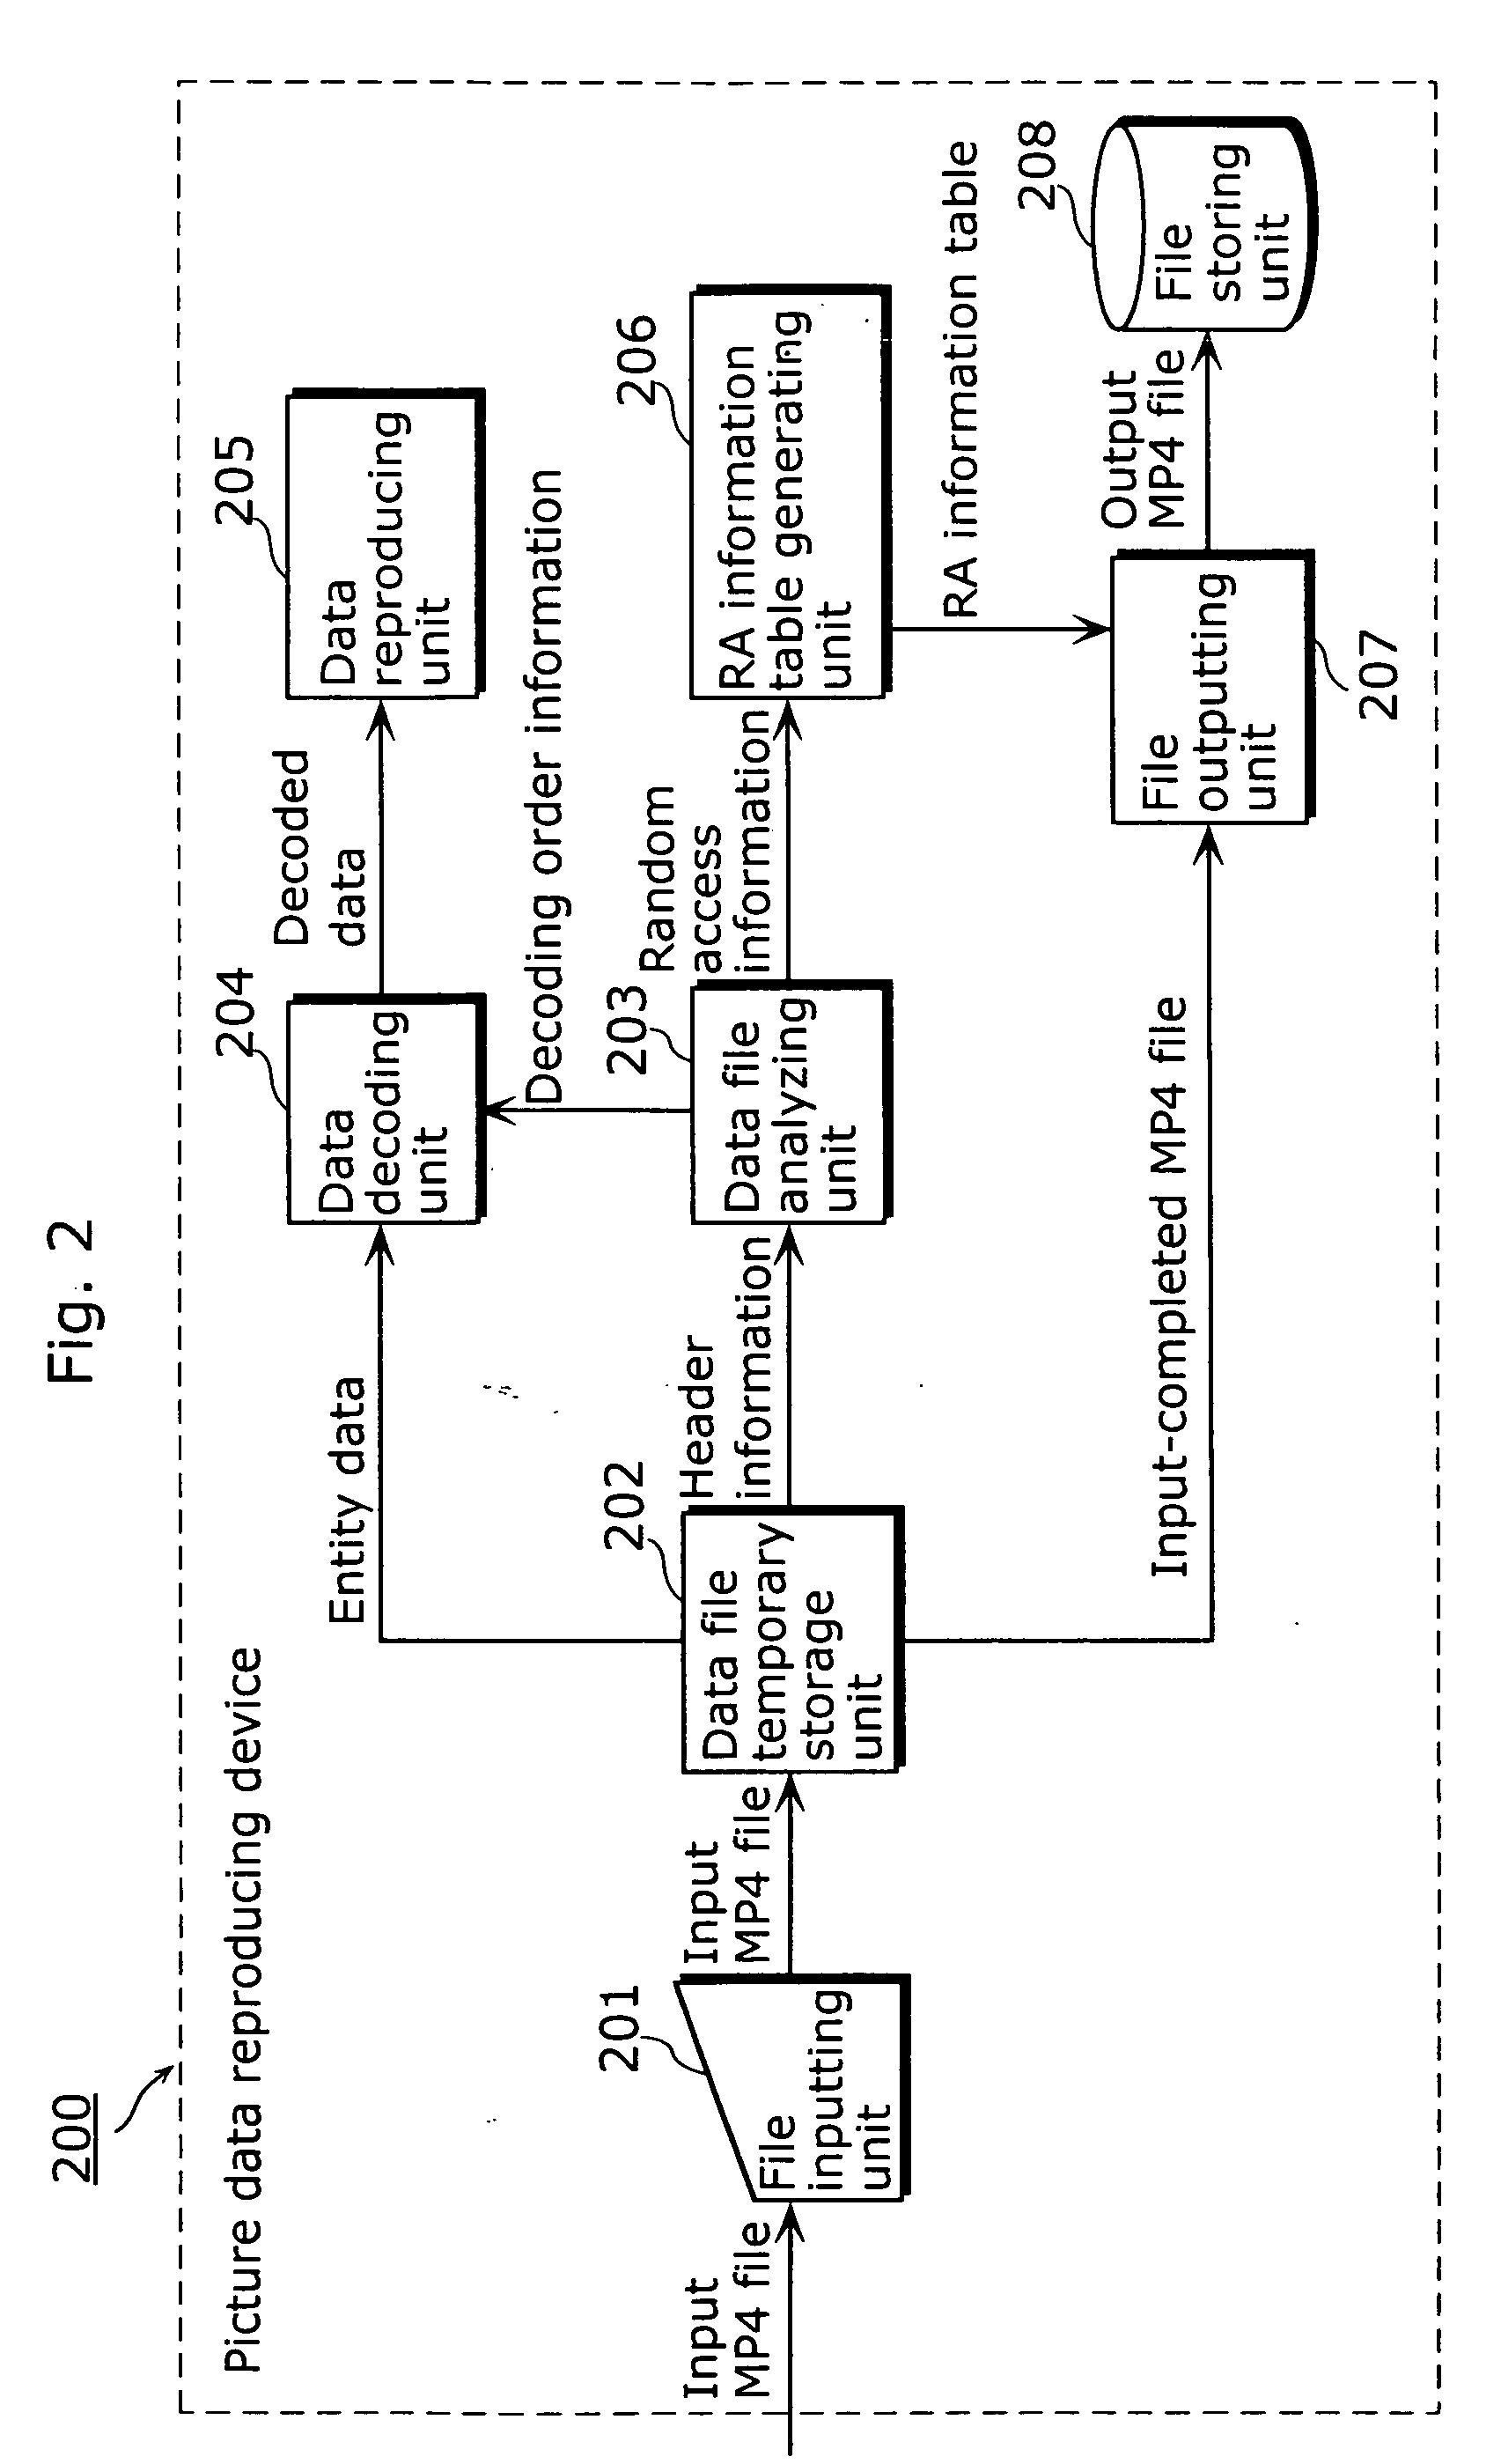 Moving picture data reproducing device with improved random access